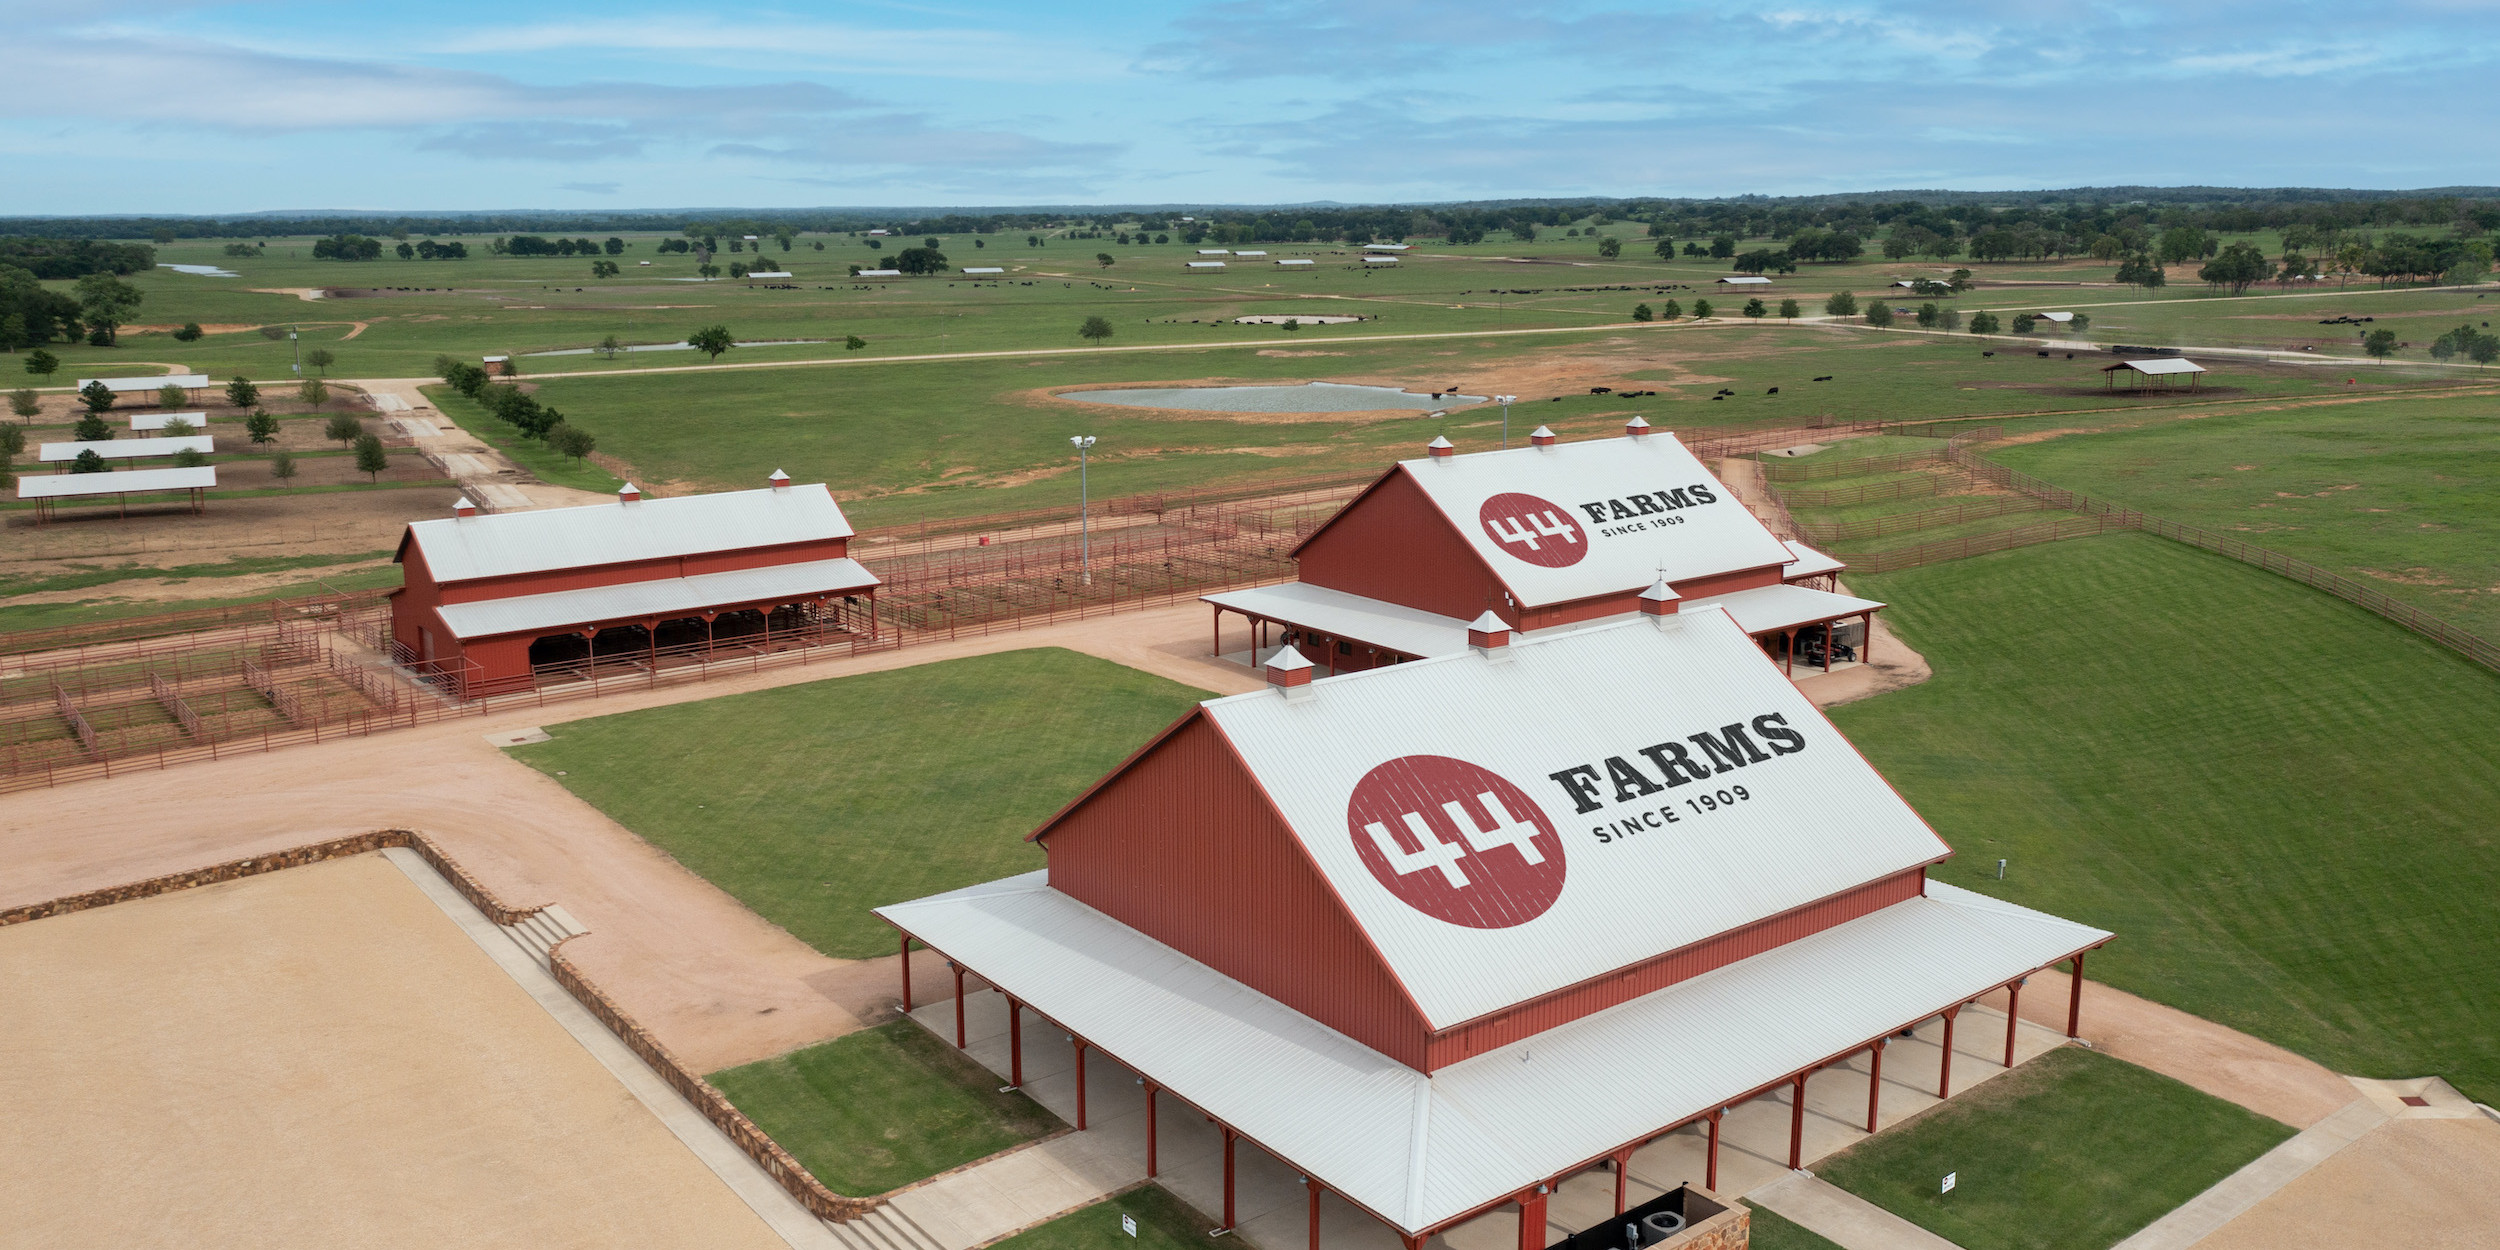 Aerial view of 44 Farms barns